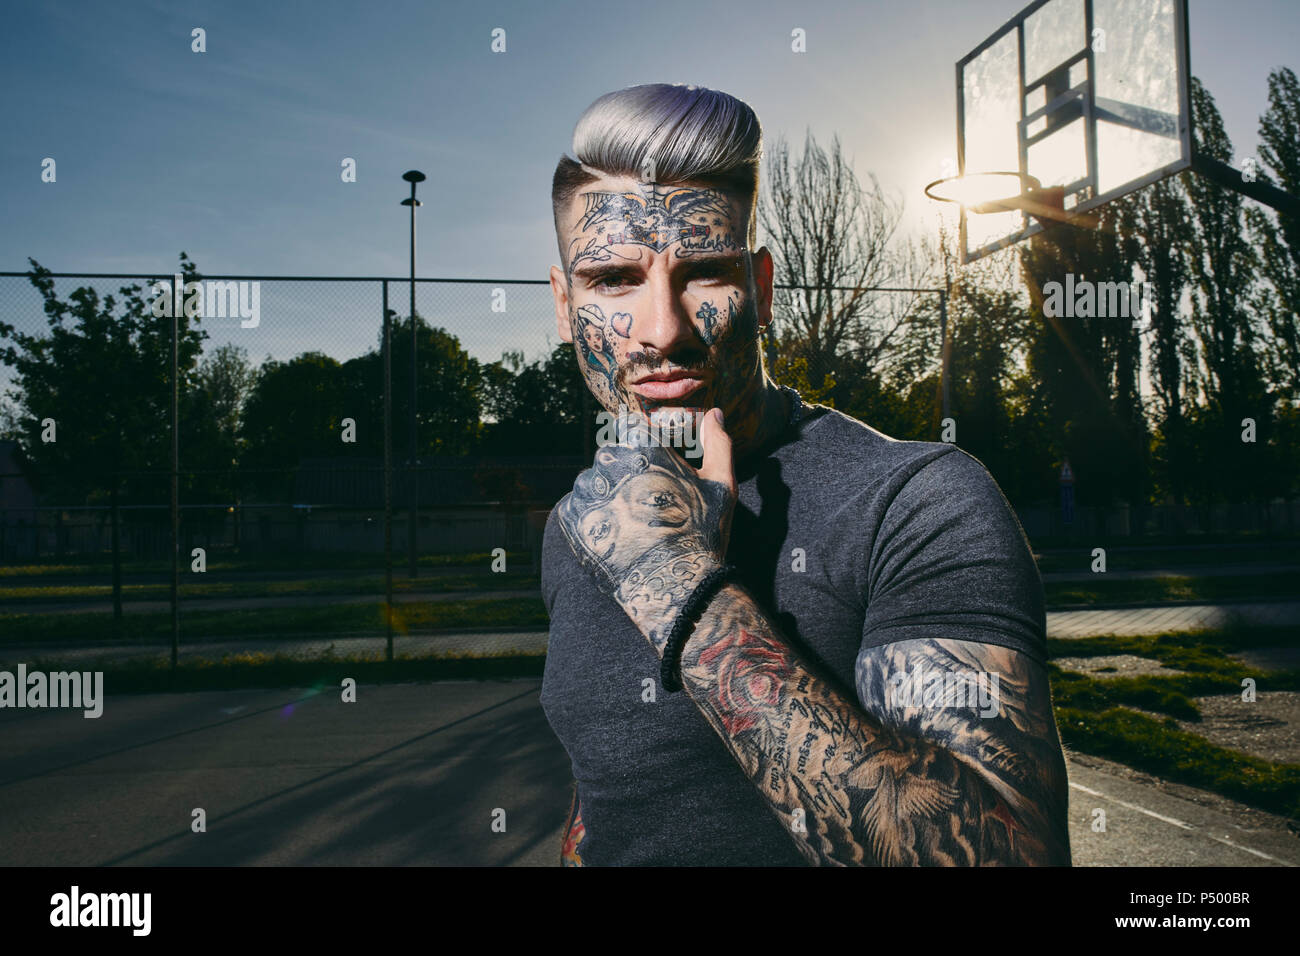 Portrait of tattooed young man on basketball court Stock Photo - Alamy